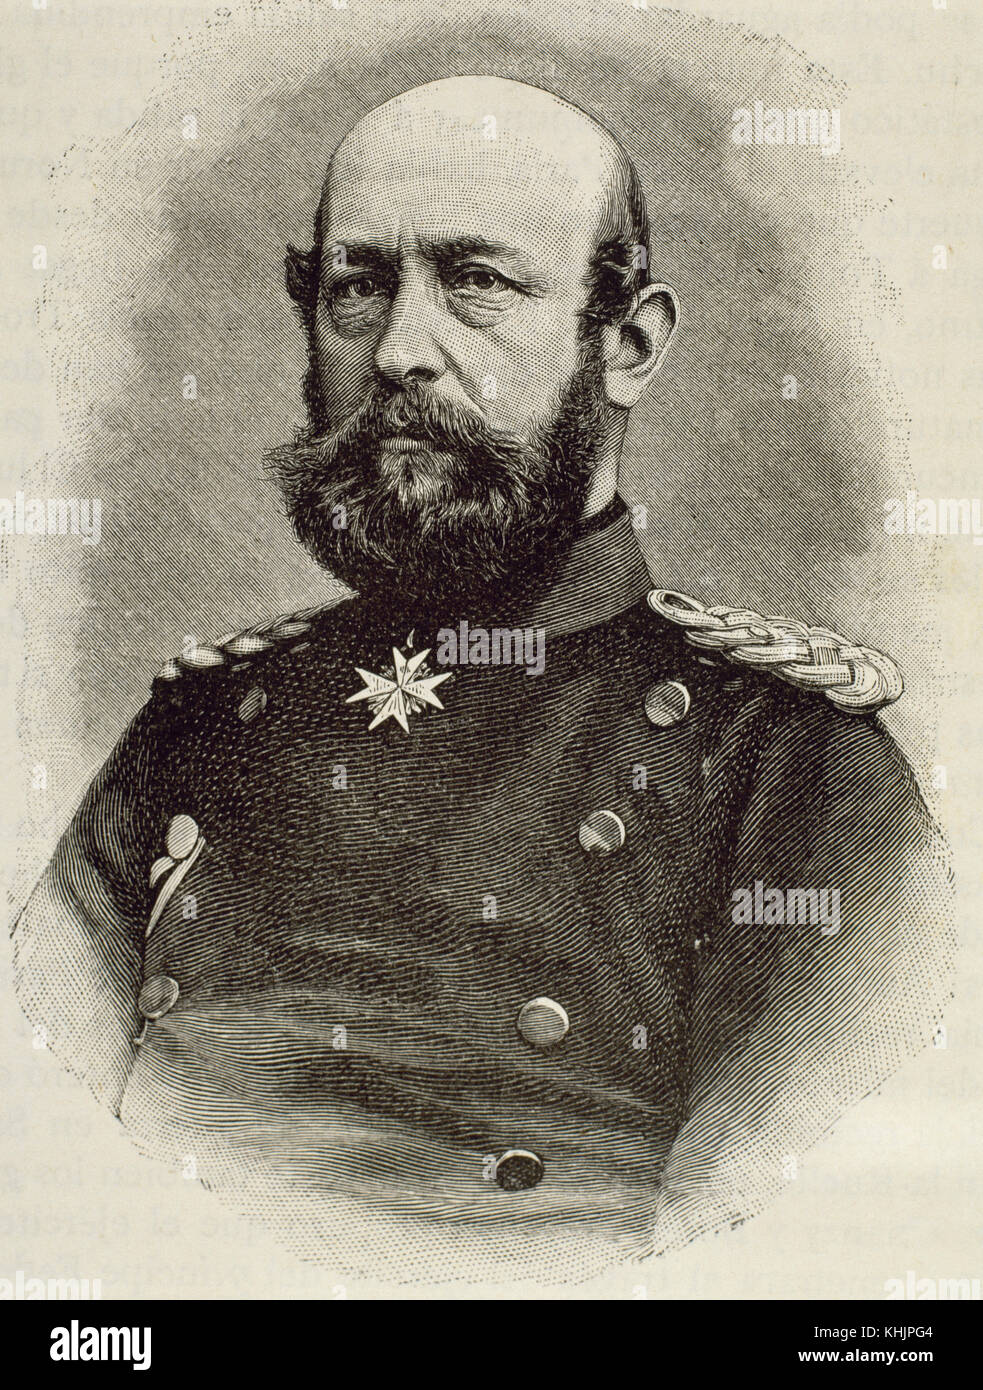 Frederick Francis II (1823-1883). Prussian officer and Grand Duke of Mecklenburg-Schwerin (1842-1883). Portrait. Engraving. Stock Photo